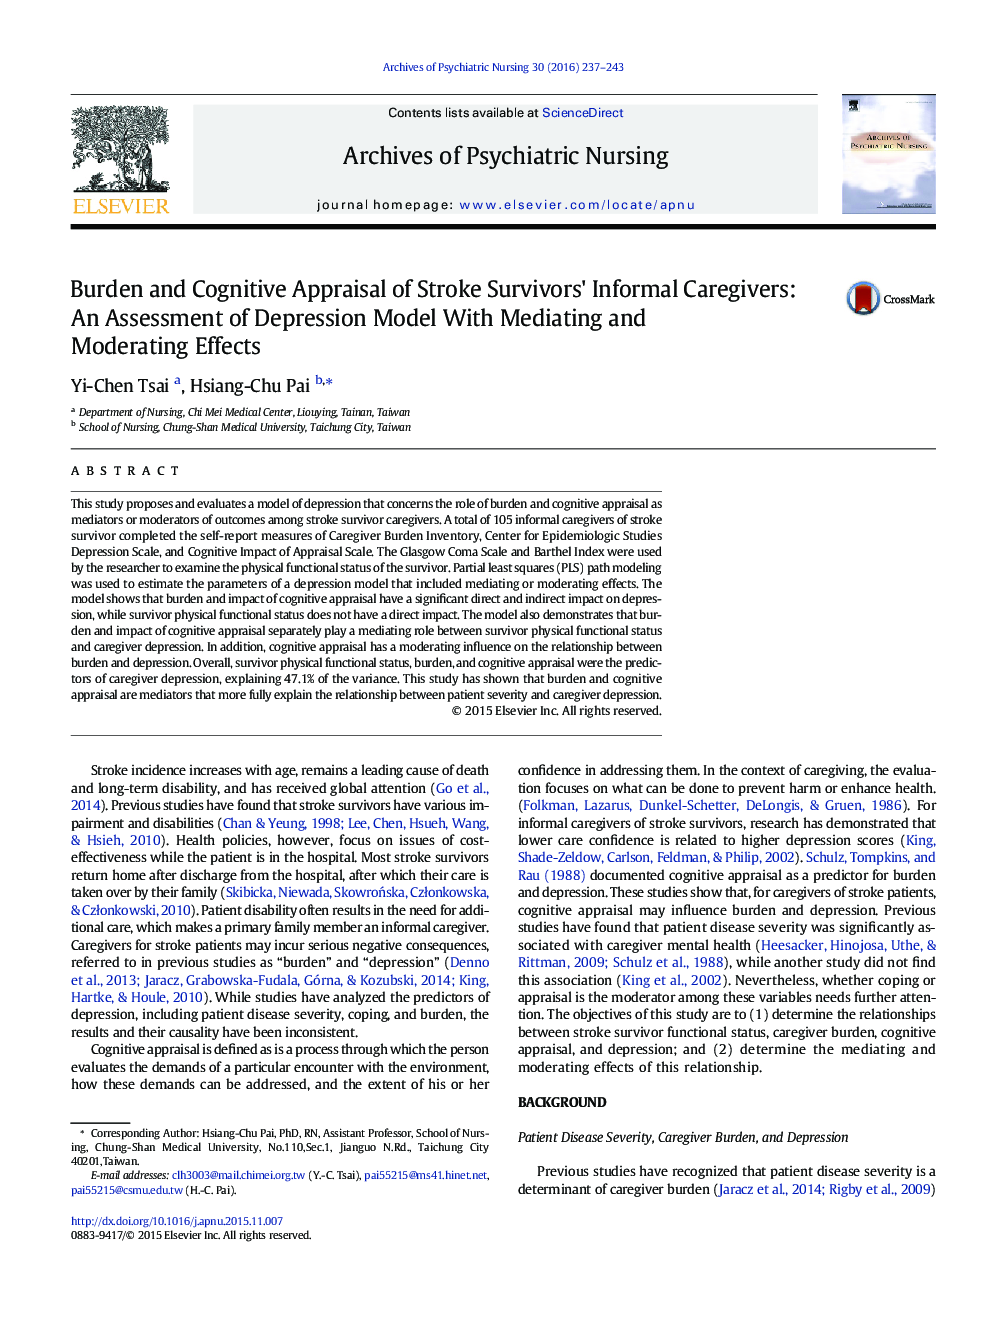 Burden and Cognitive Appraisal of Stroke Survivors' Informal Caregivers: An Assessment of Depression Model With Mediating and Moderating Effects